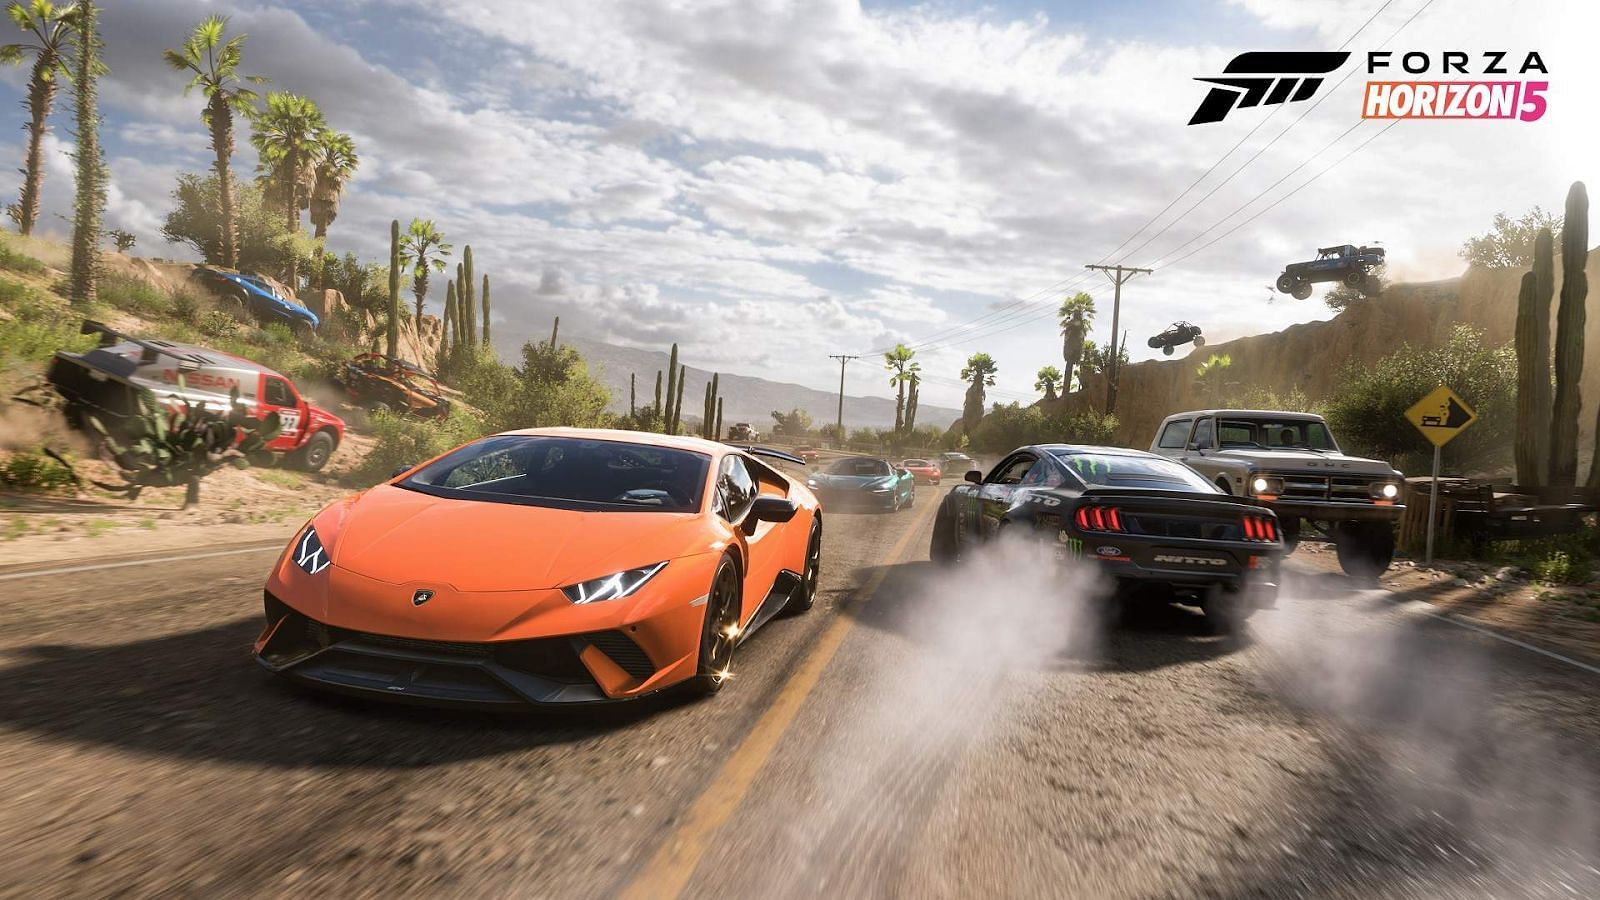 Forza Horizon 5 system requirements for PC (Image by Xbox)